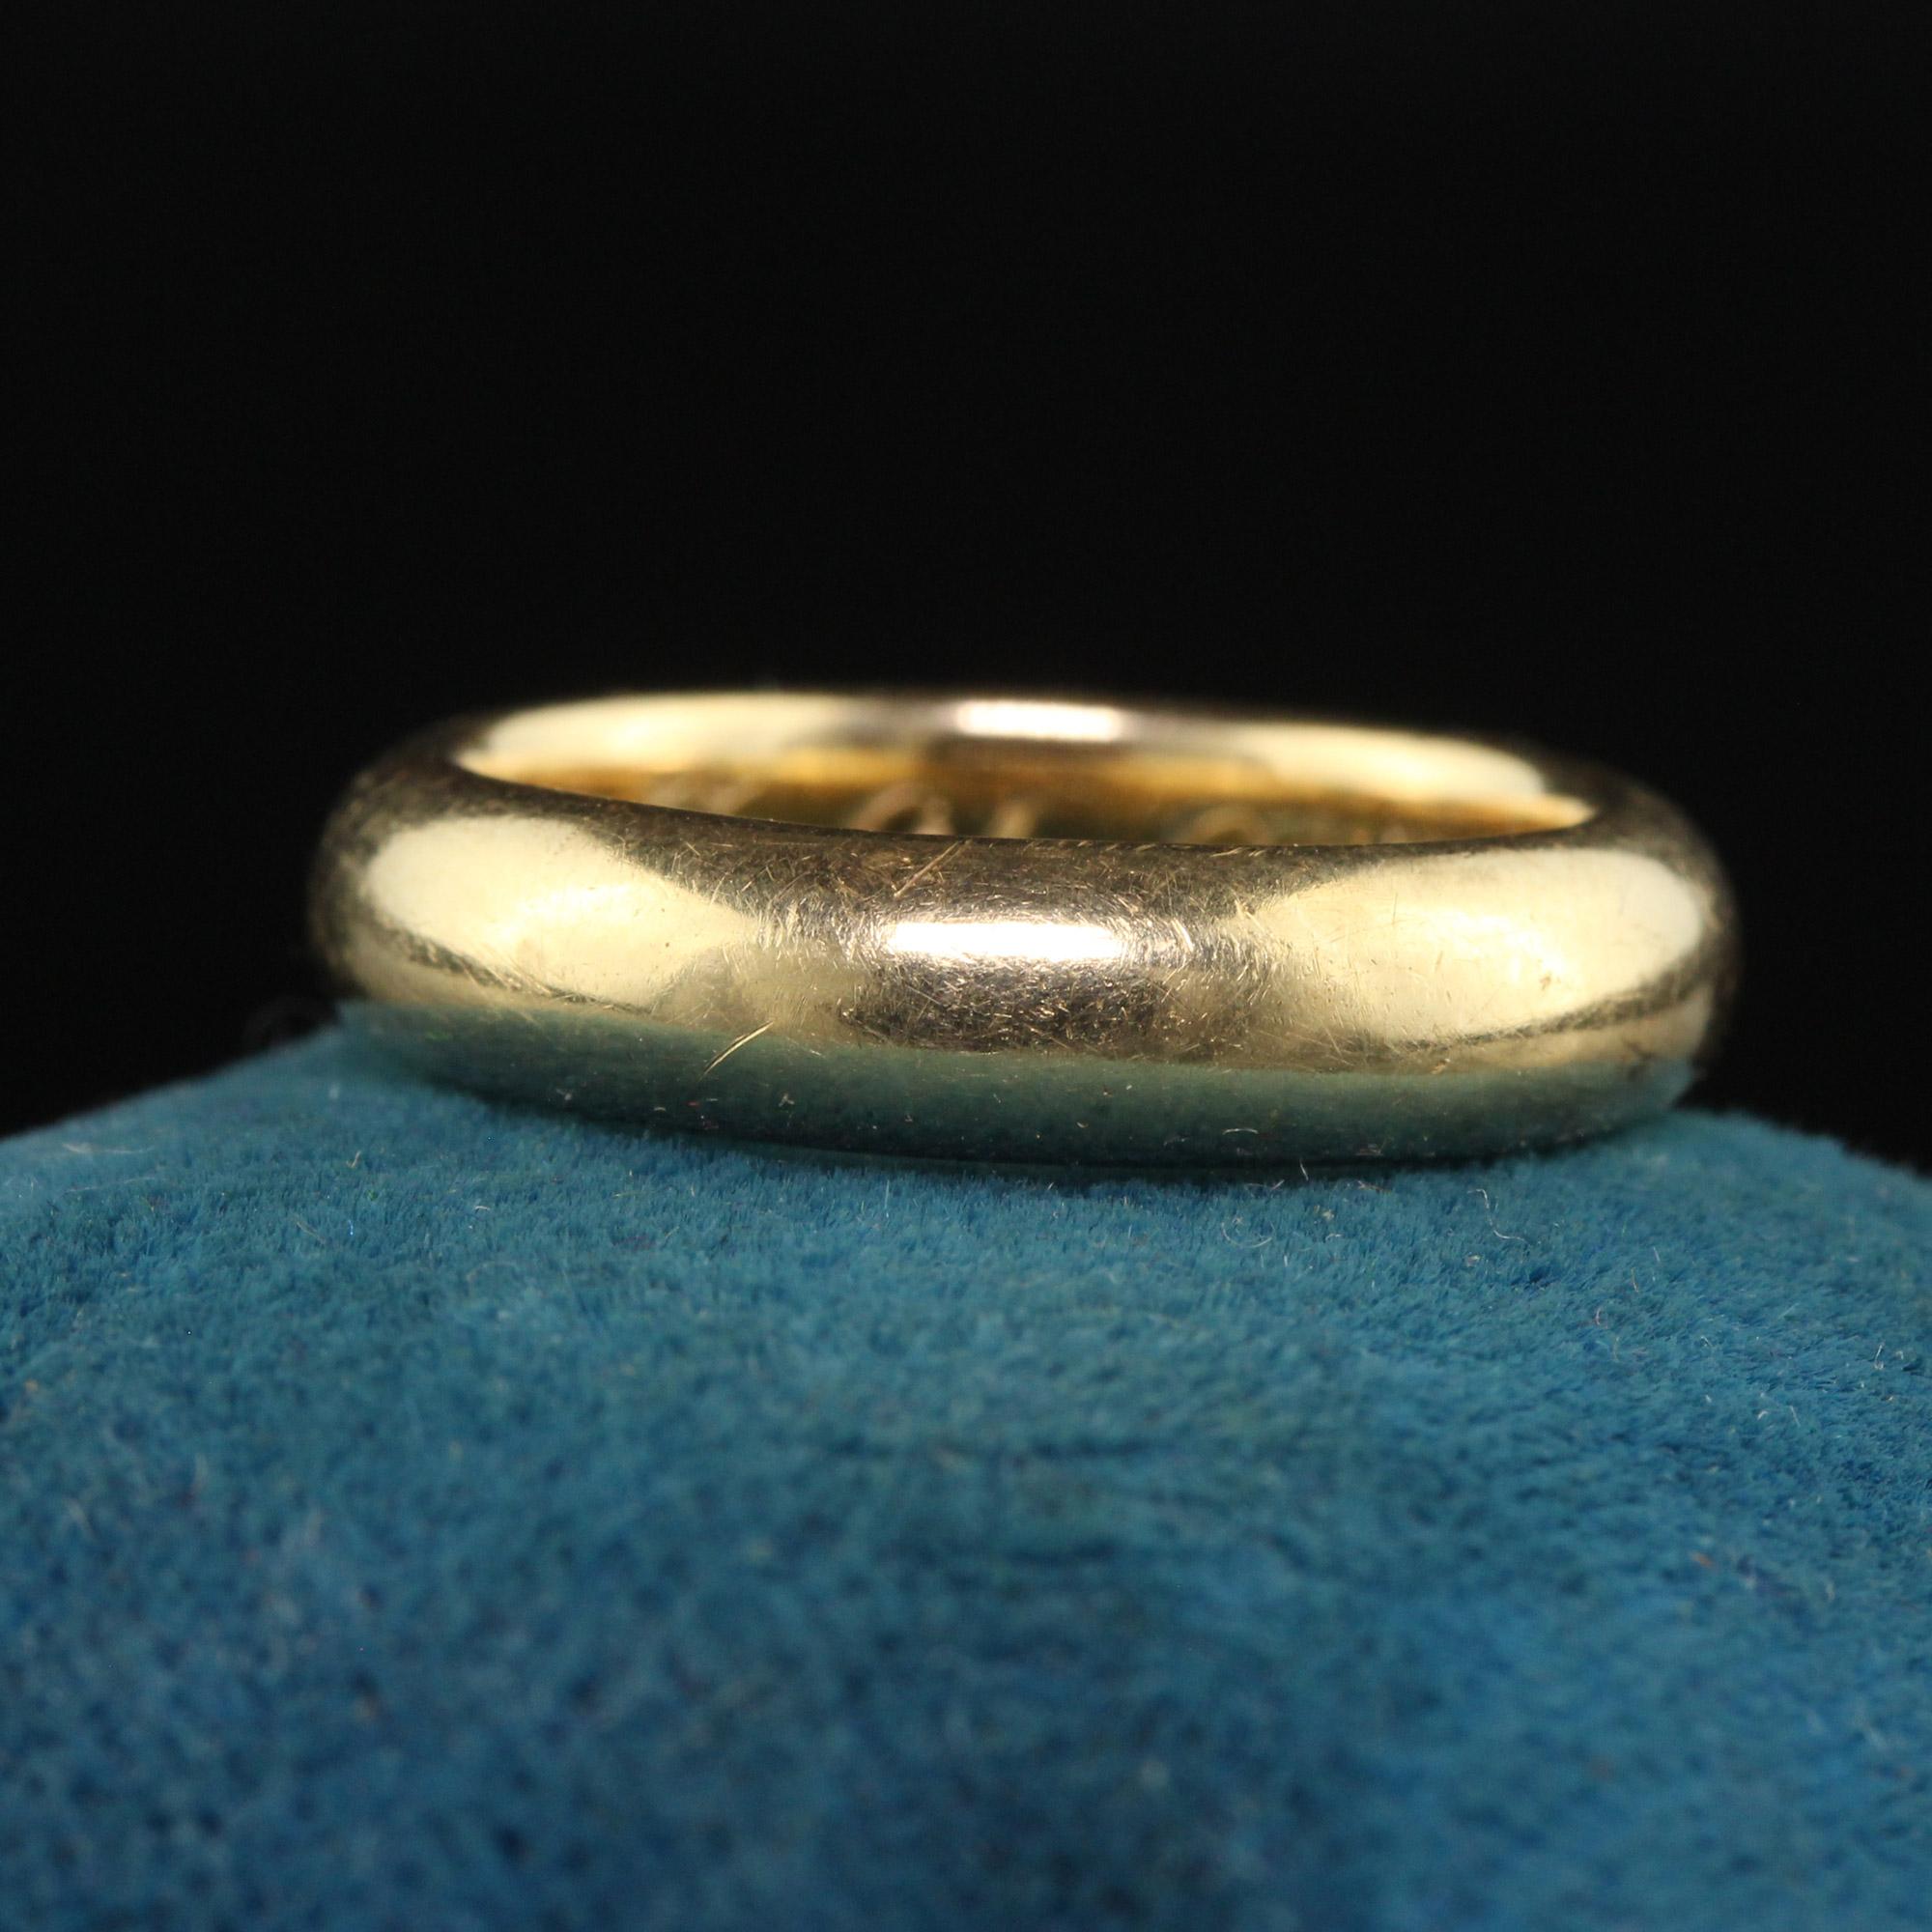 Beautiful Vintage Tiffany and Co 14K Yellow Gold Classic Wedding Band - Size 4 1/2. This classic Tiffany and Co wedding band is crafted in 14k yellow gold. The ring is engraved inside the band 